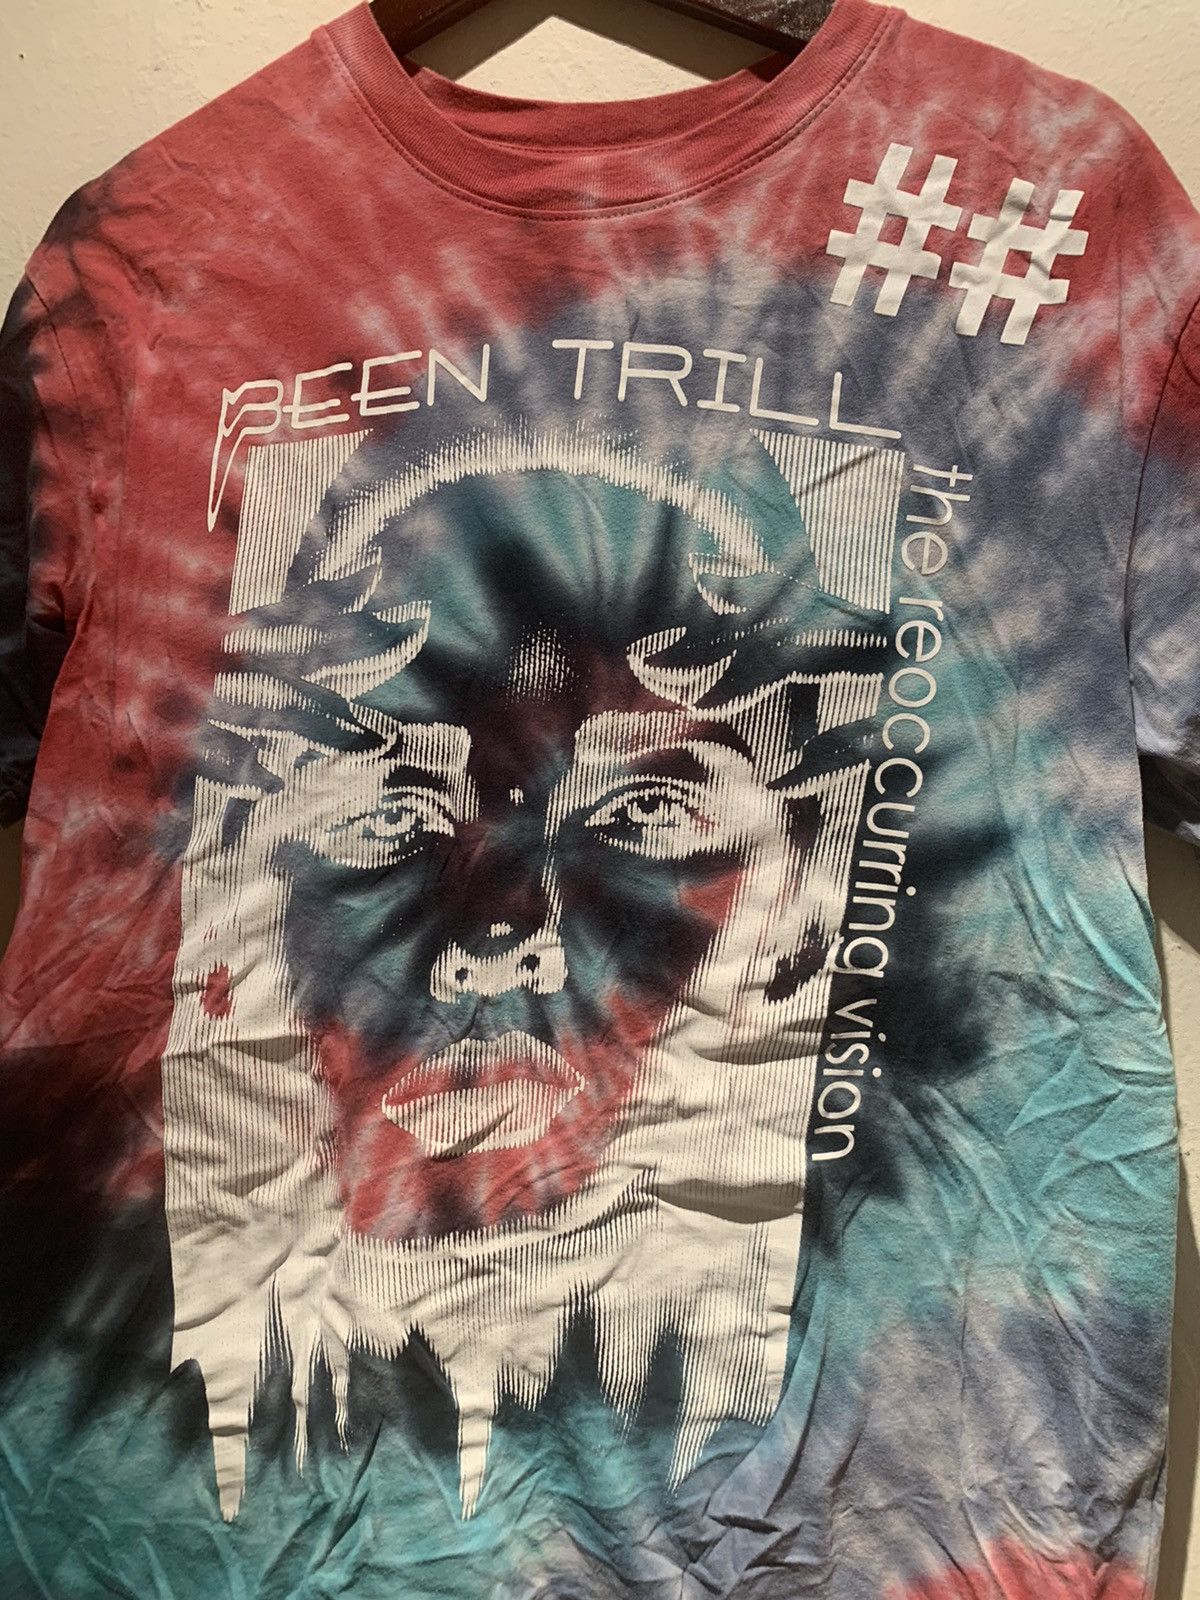 Vintage *RARE* Vintage Been Trill Reoccurring Vision All-Over Shirt Size US M / EU 48-50 / 2 - 3 Thumbnail